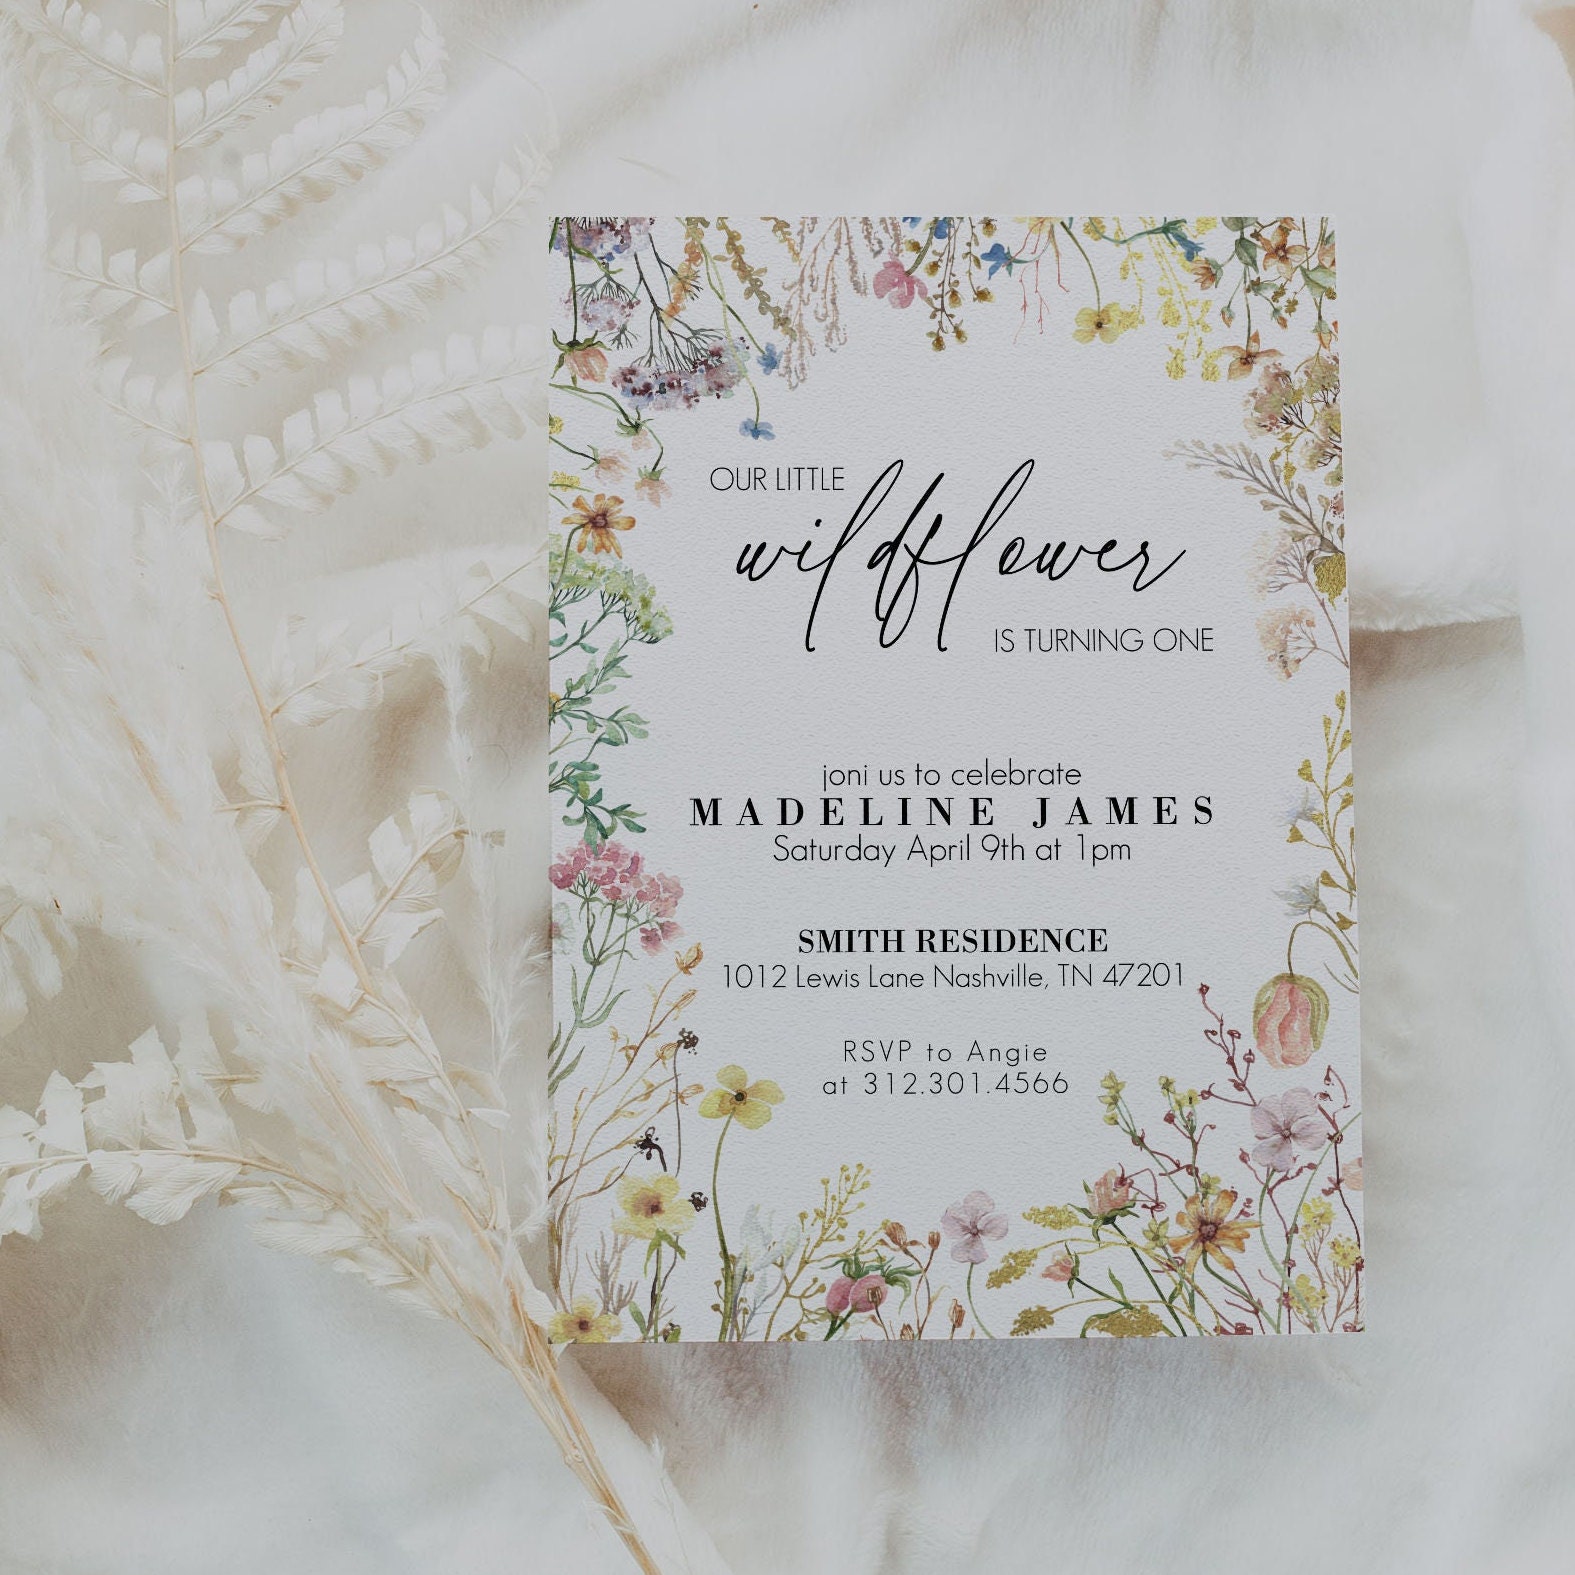 Wildflower Invitations With Envelopes (20 Count) - Floral Boho Garden Theme  For Bridal Shower, 1st Birthday, Adult Birthday, Brunch or Baby Shower